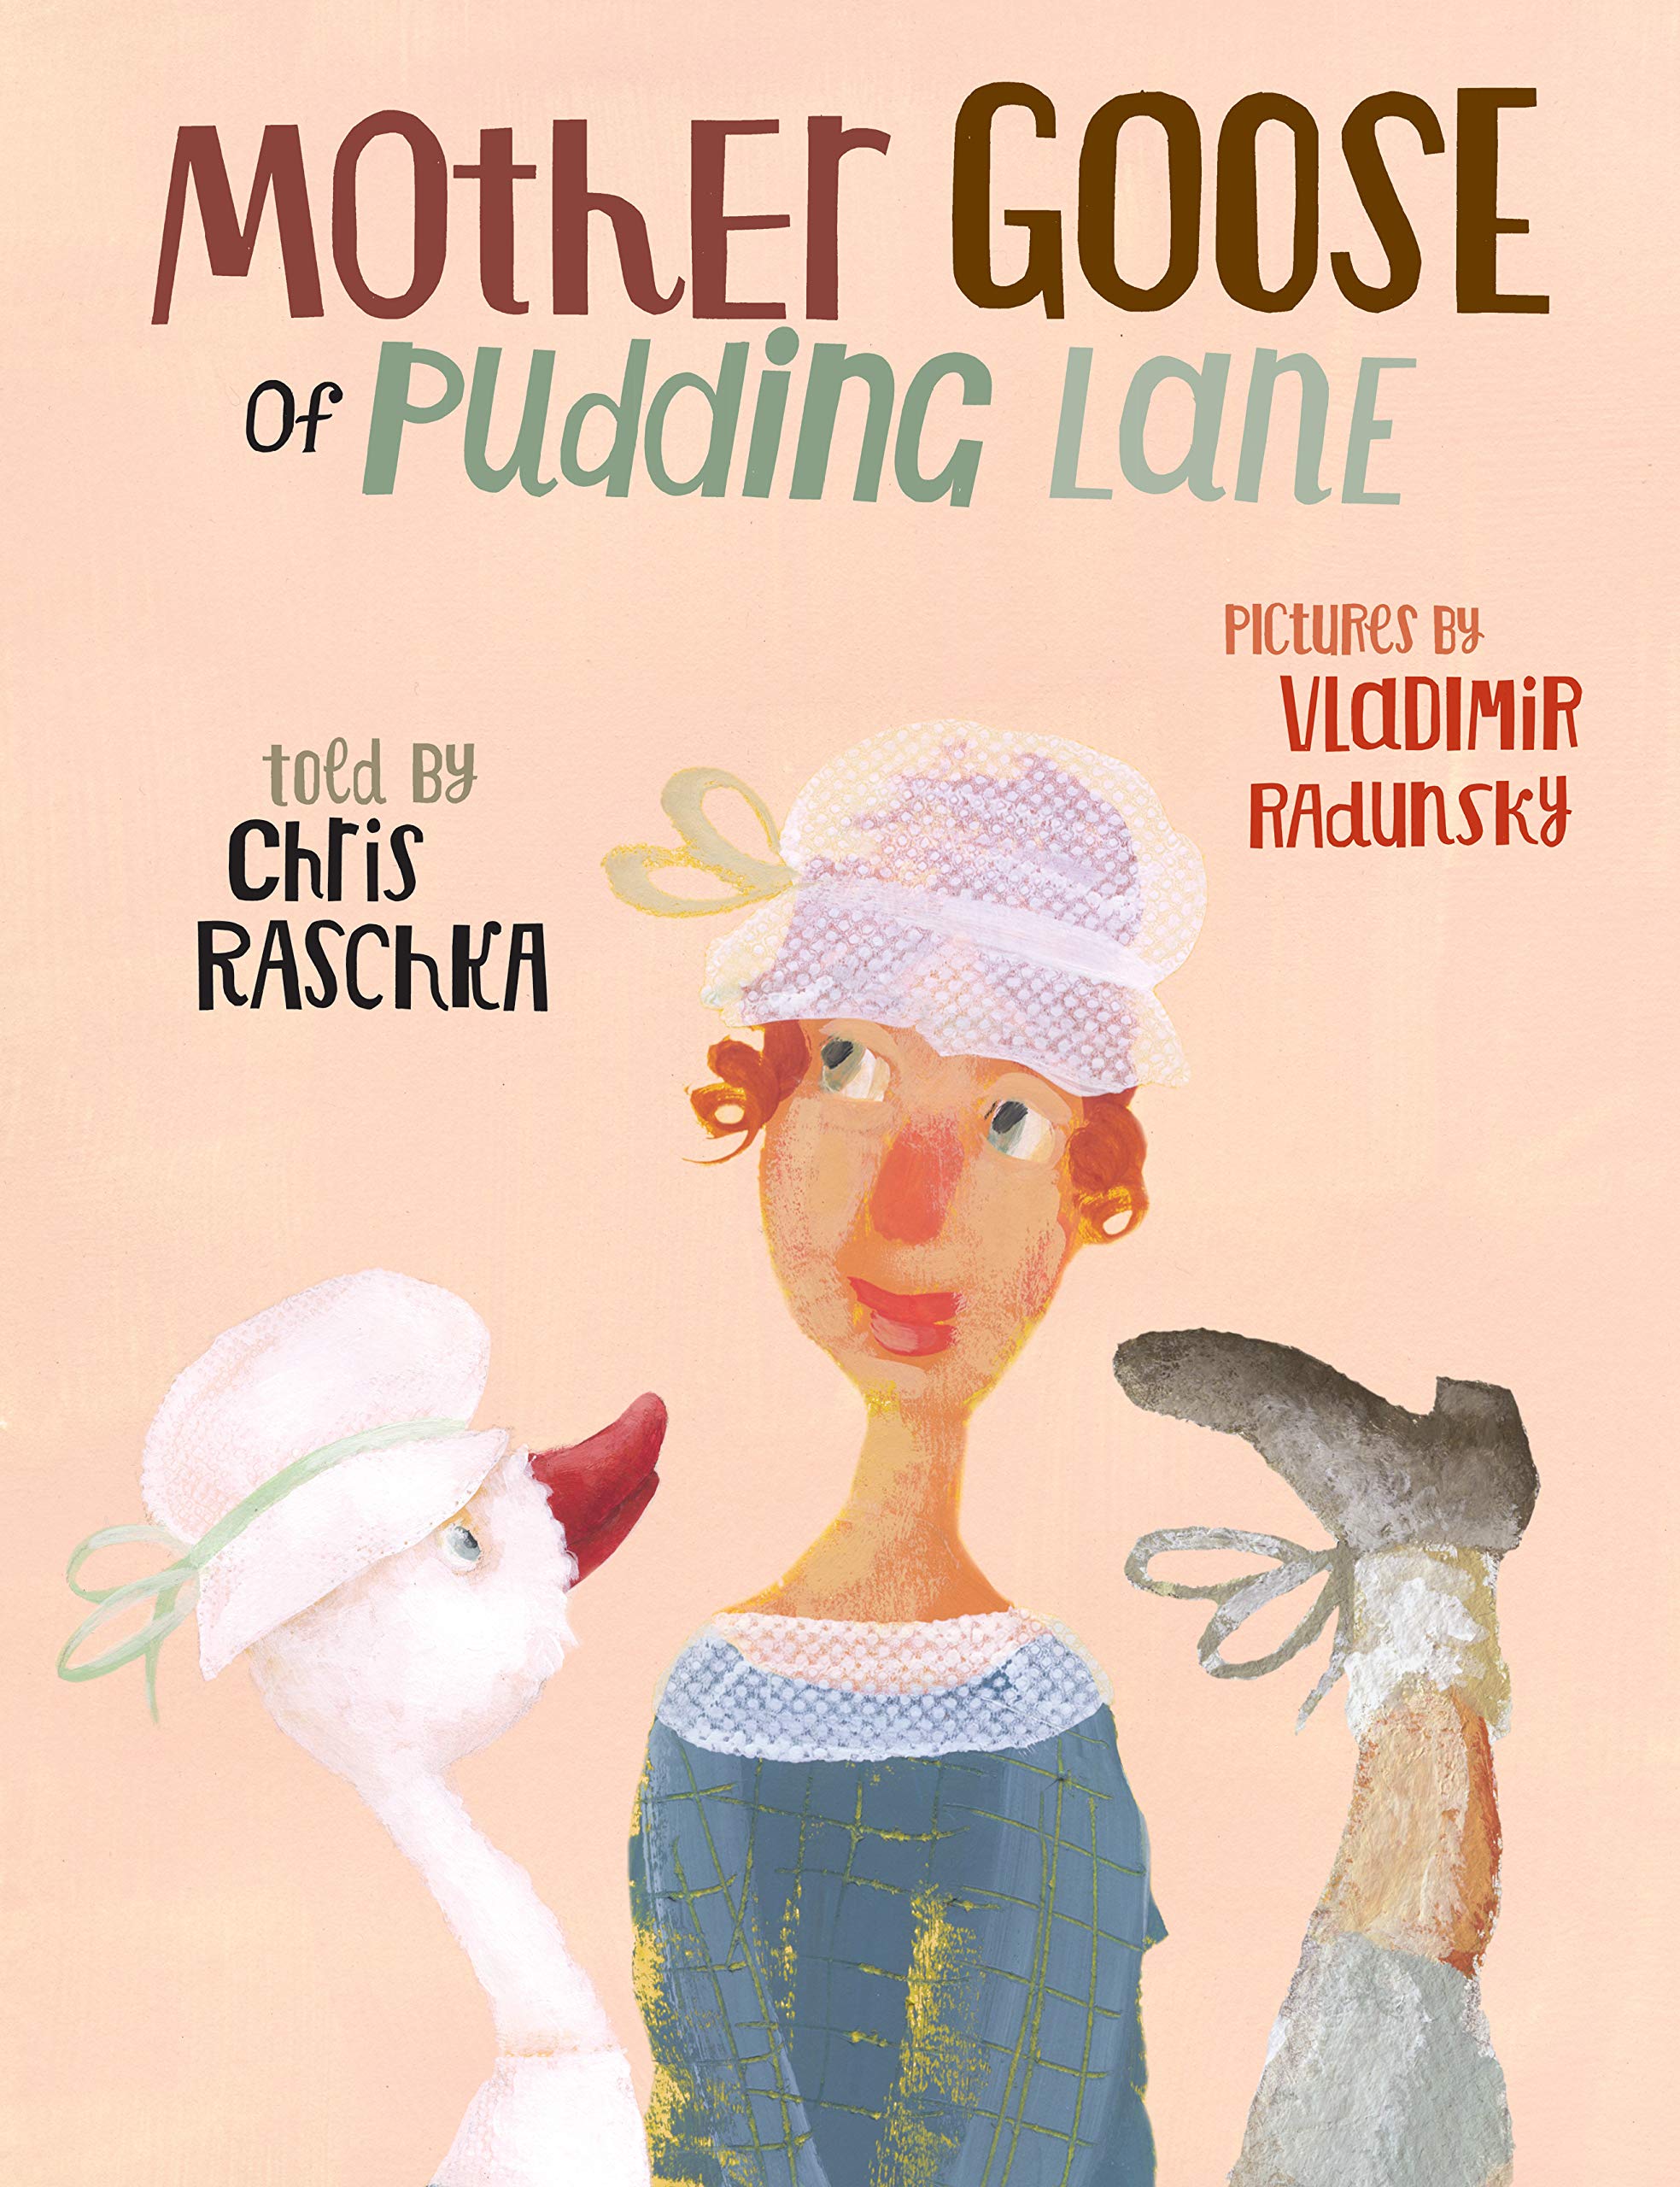 Sunday Story Time: Mother Goose of Pudding Lane by Chris Raschka